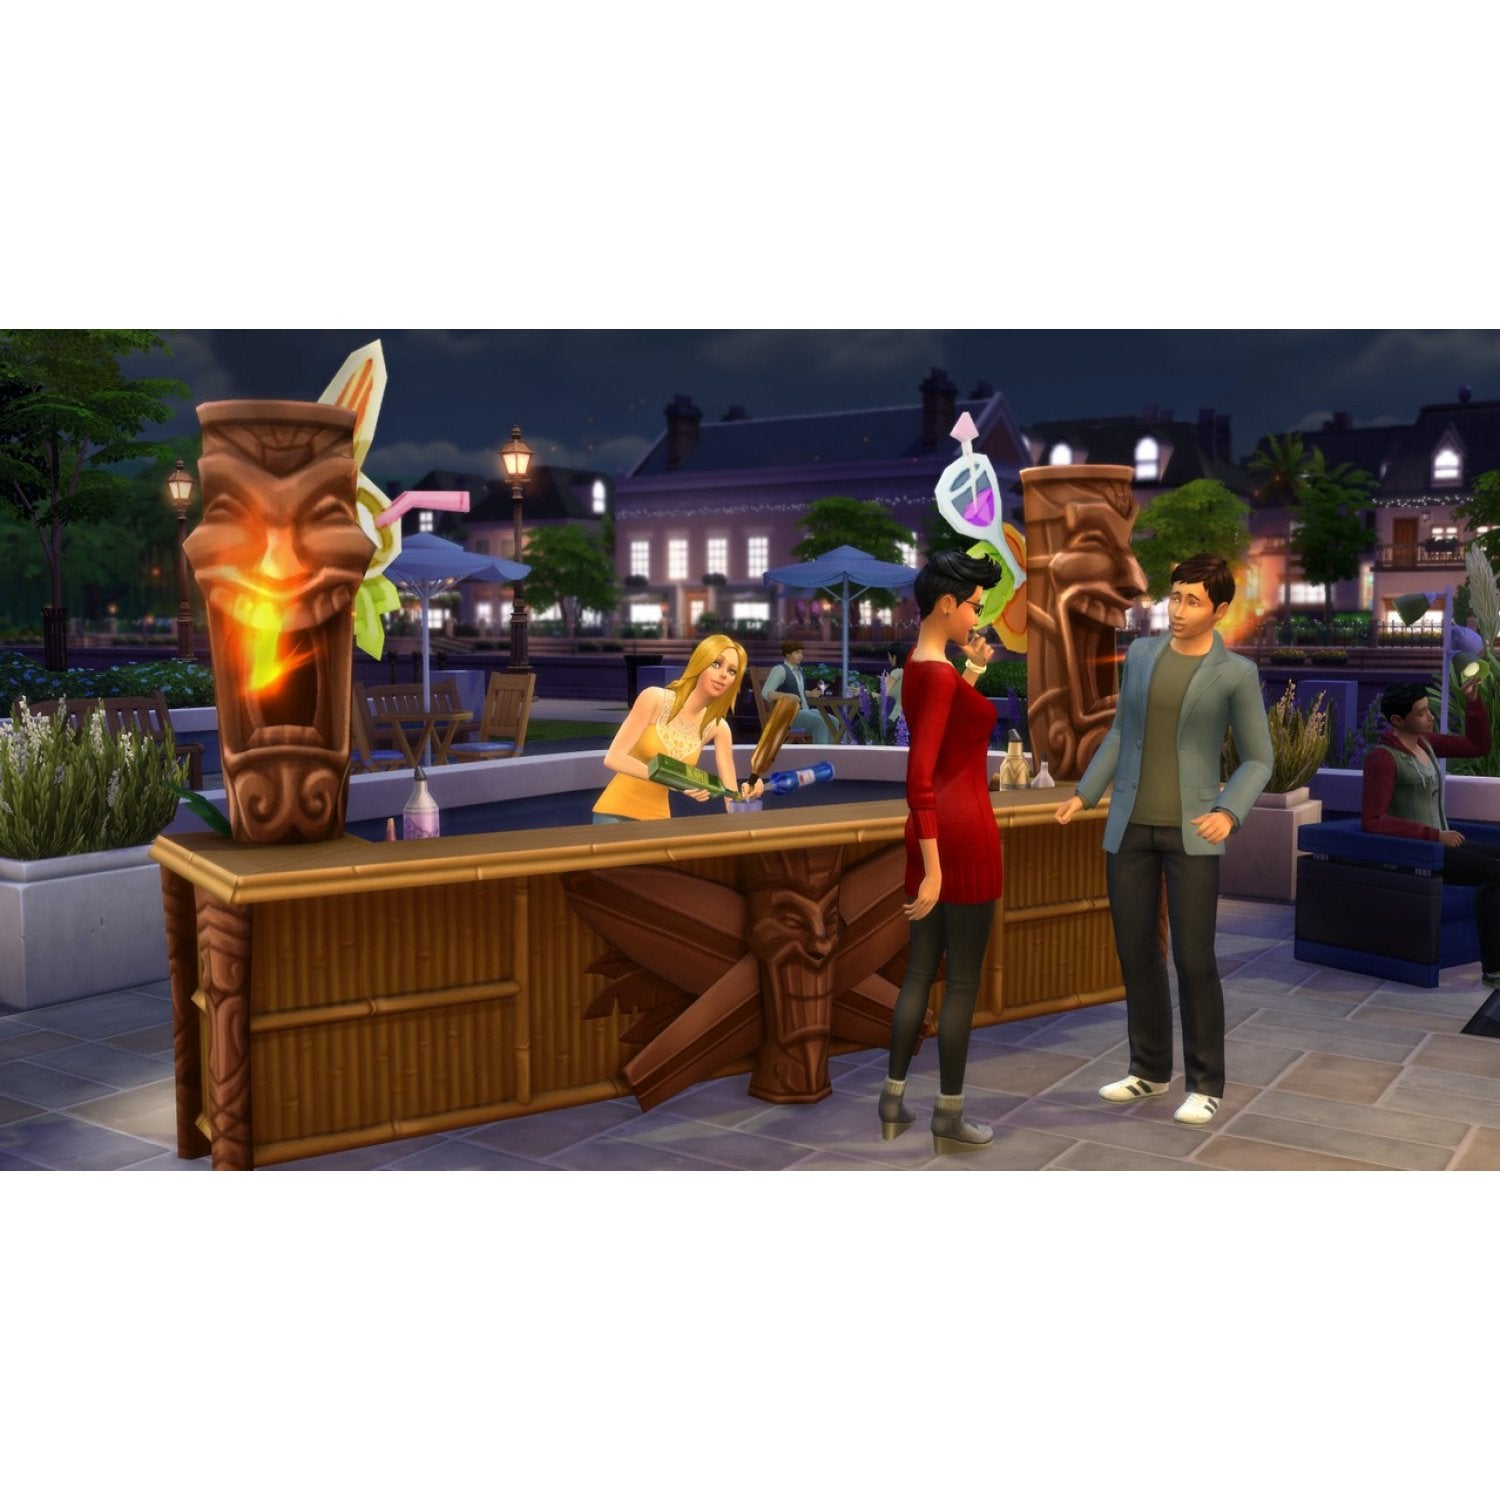 The Sims 4 - PS4 games - PlayStation (US)